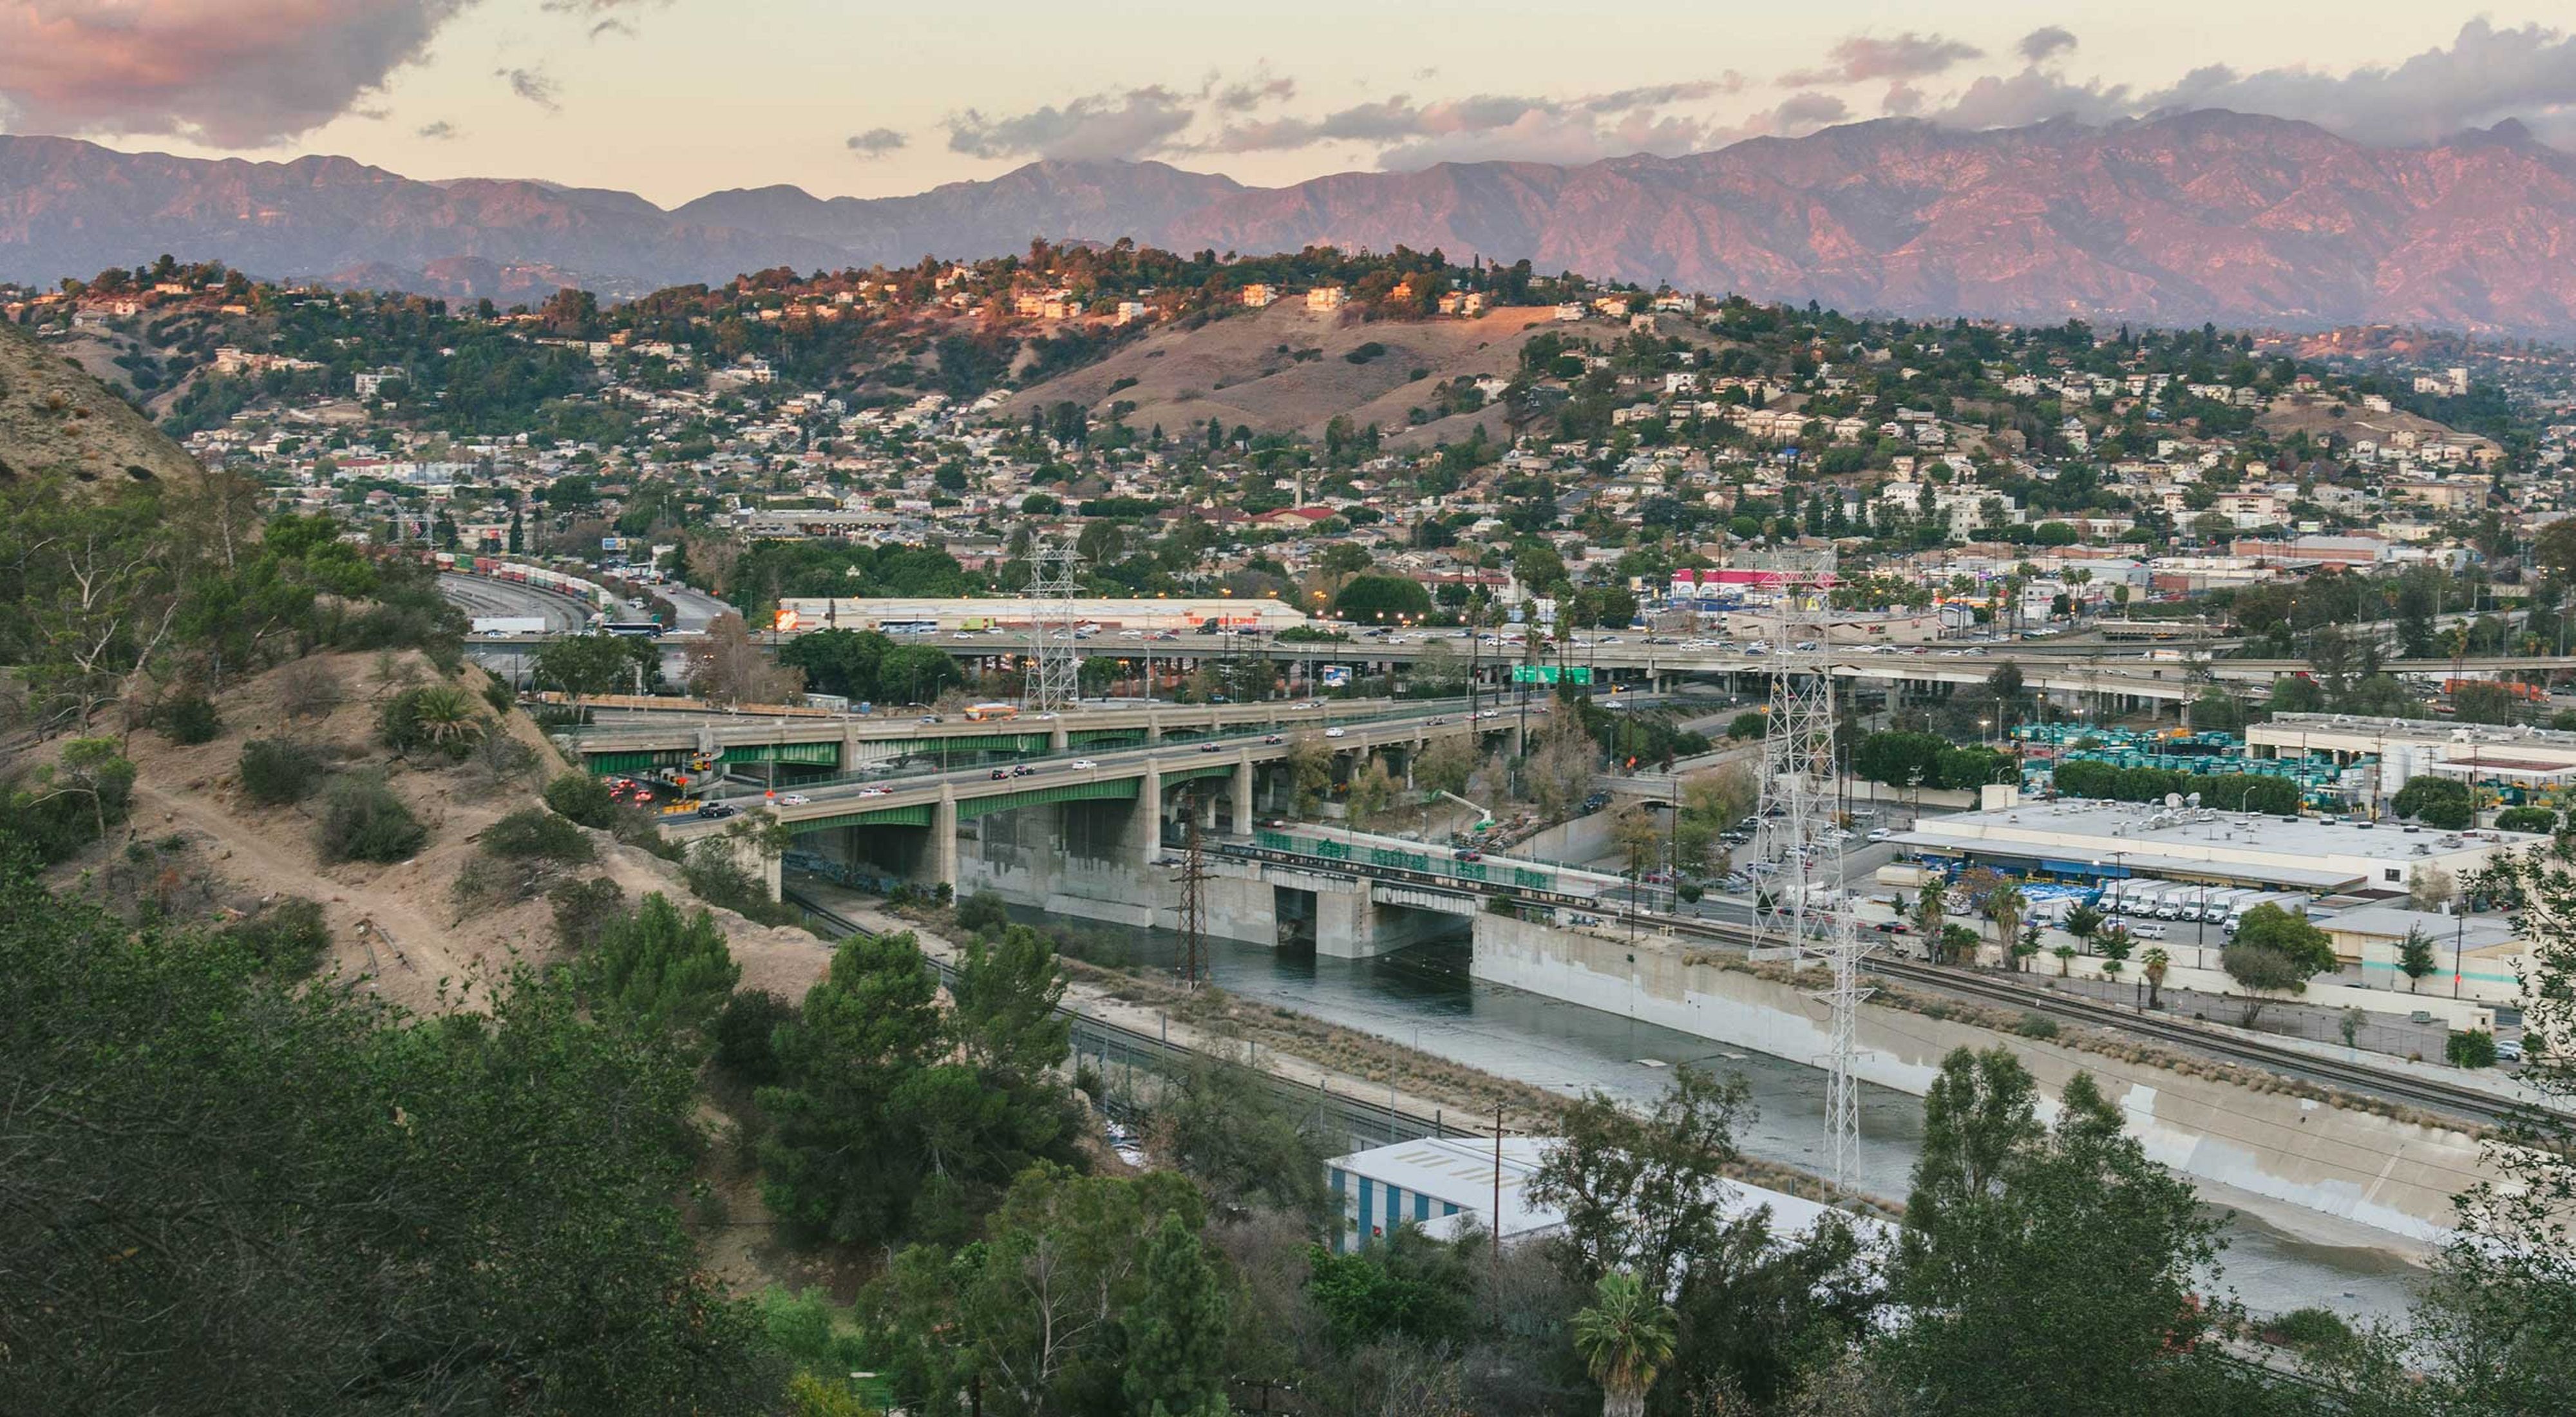 Freeways, roads and buildings in the hilly landscape of Northeast Los Angeles.